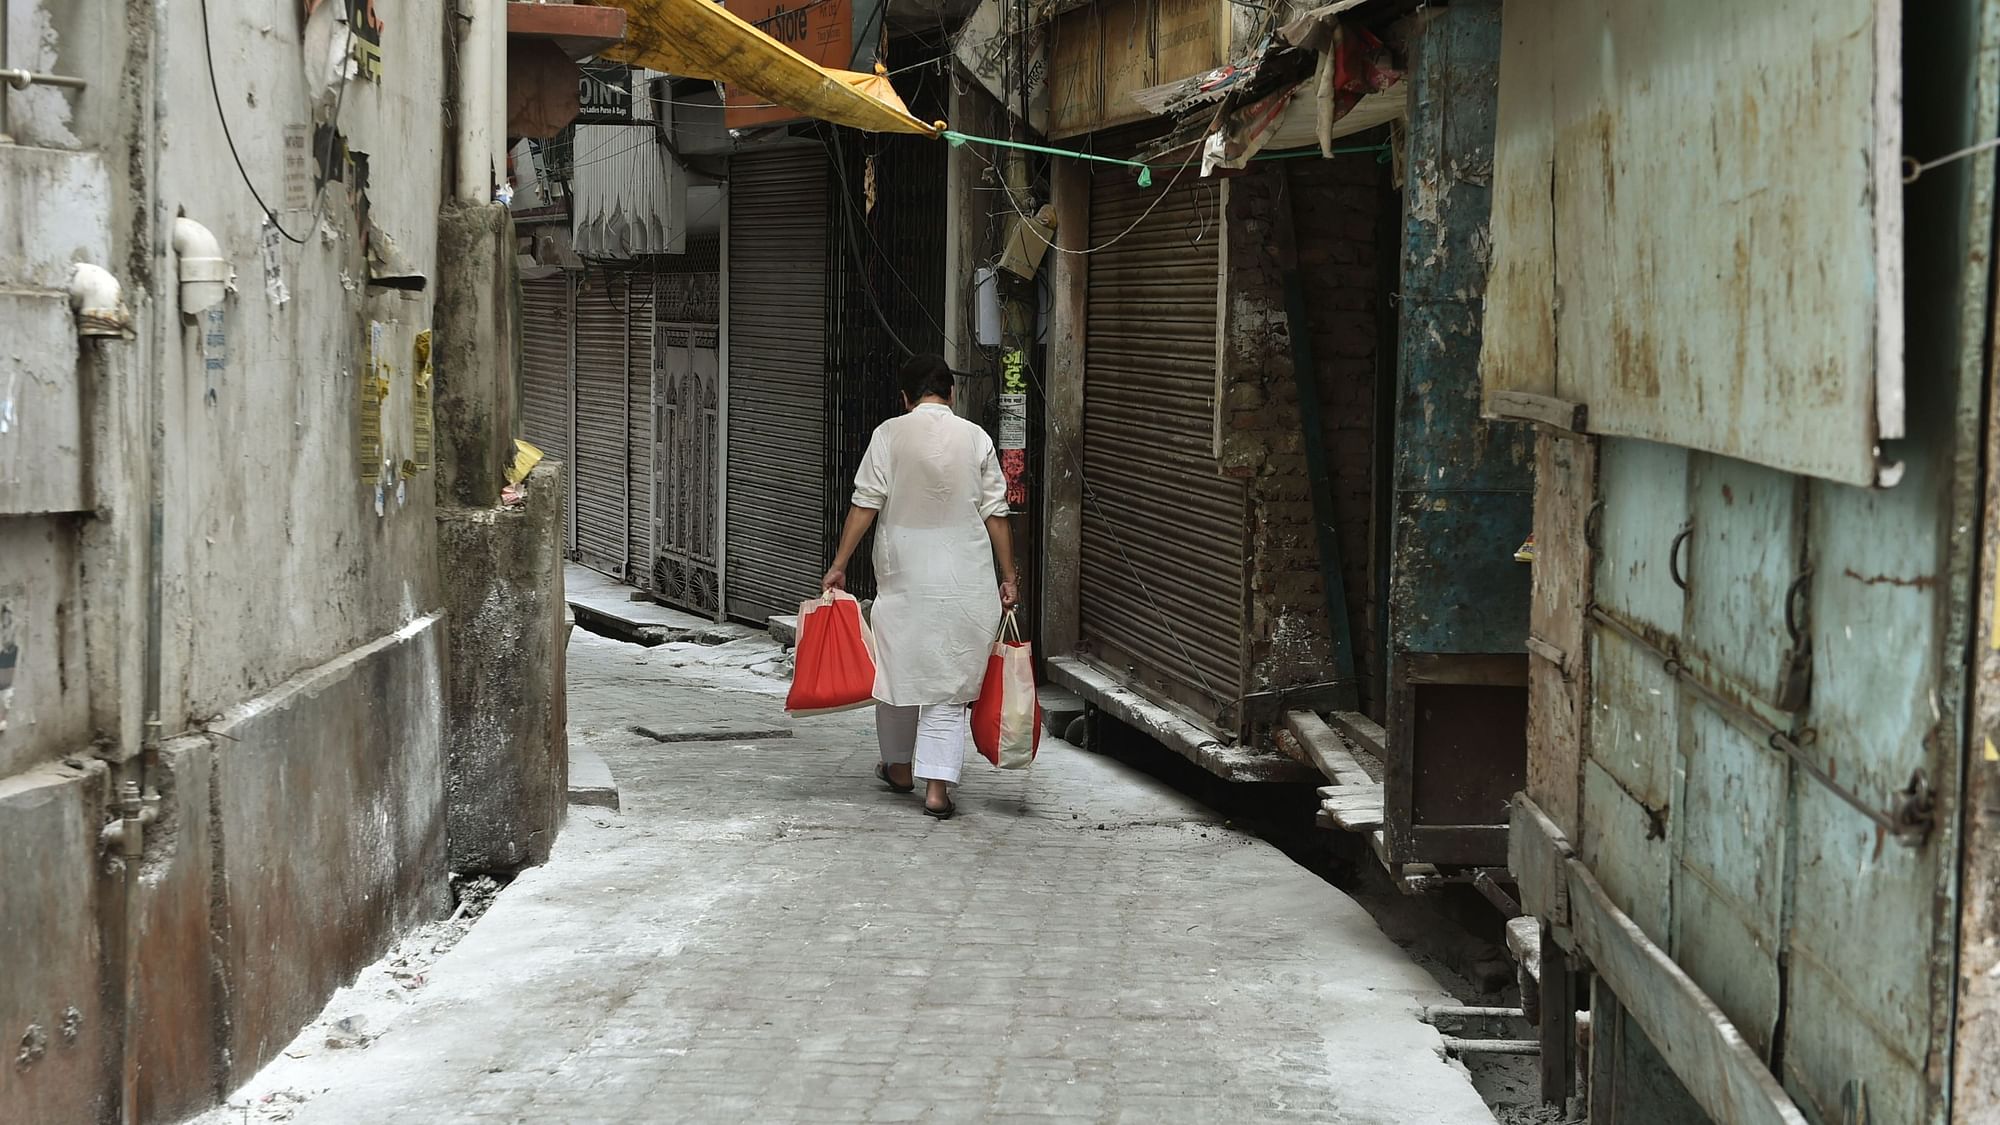 A man walks back to his residence after collecting essential supplies from a delivery person in a sealed area of Aminabad, where a COVID-19 case was detected yesterday, in Lucknow, Wednesday, 15 April, 2020.